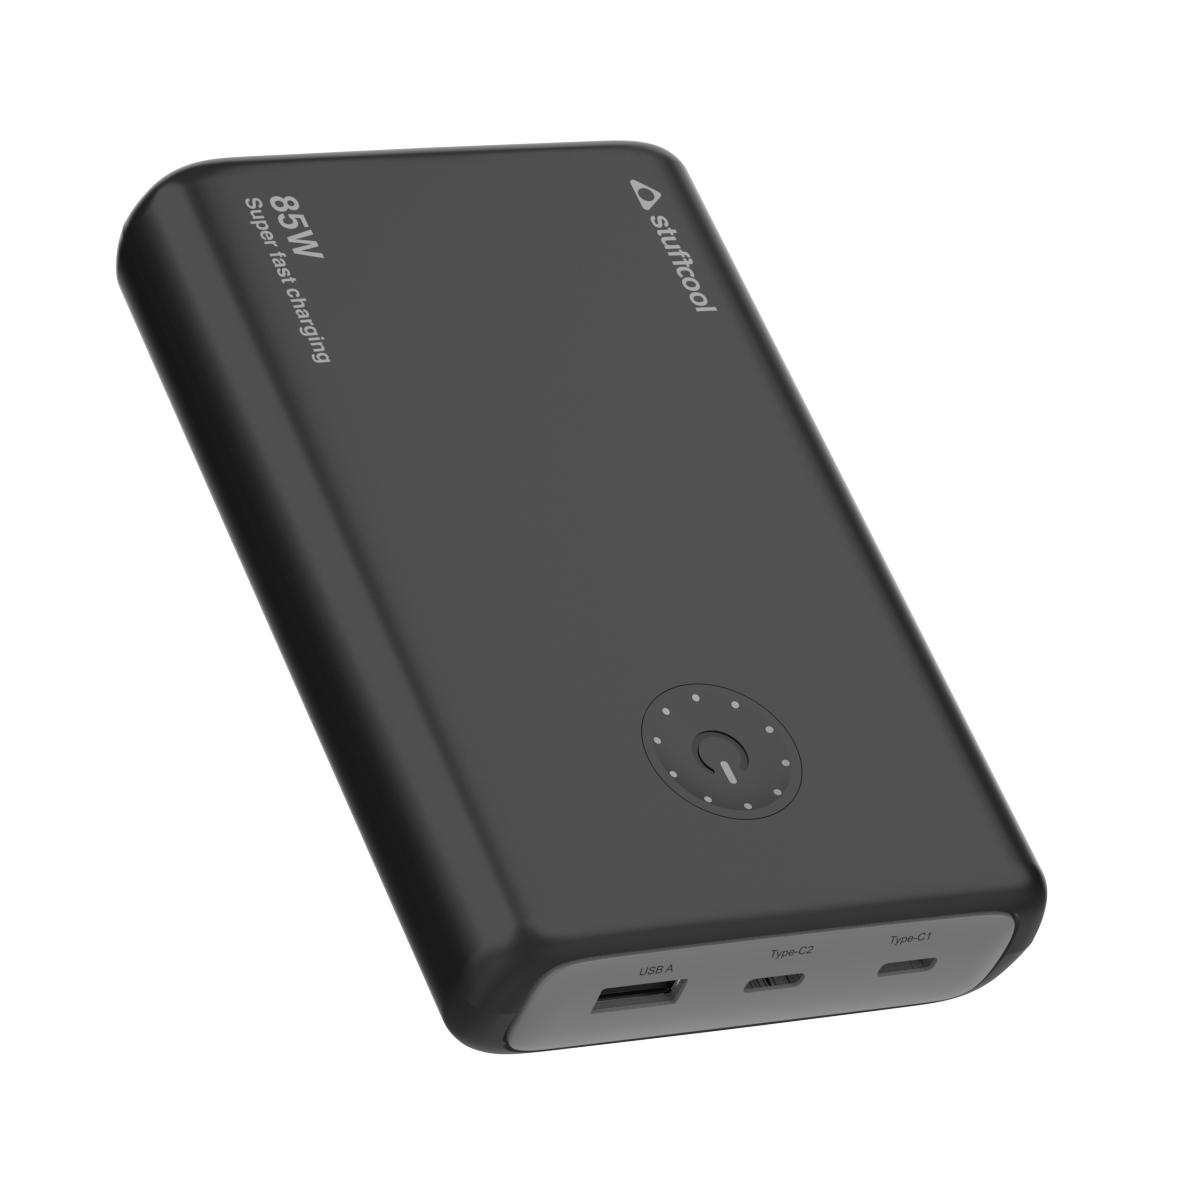 Stuffcool Introduce Superpower Power Bank - T3 India